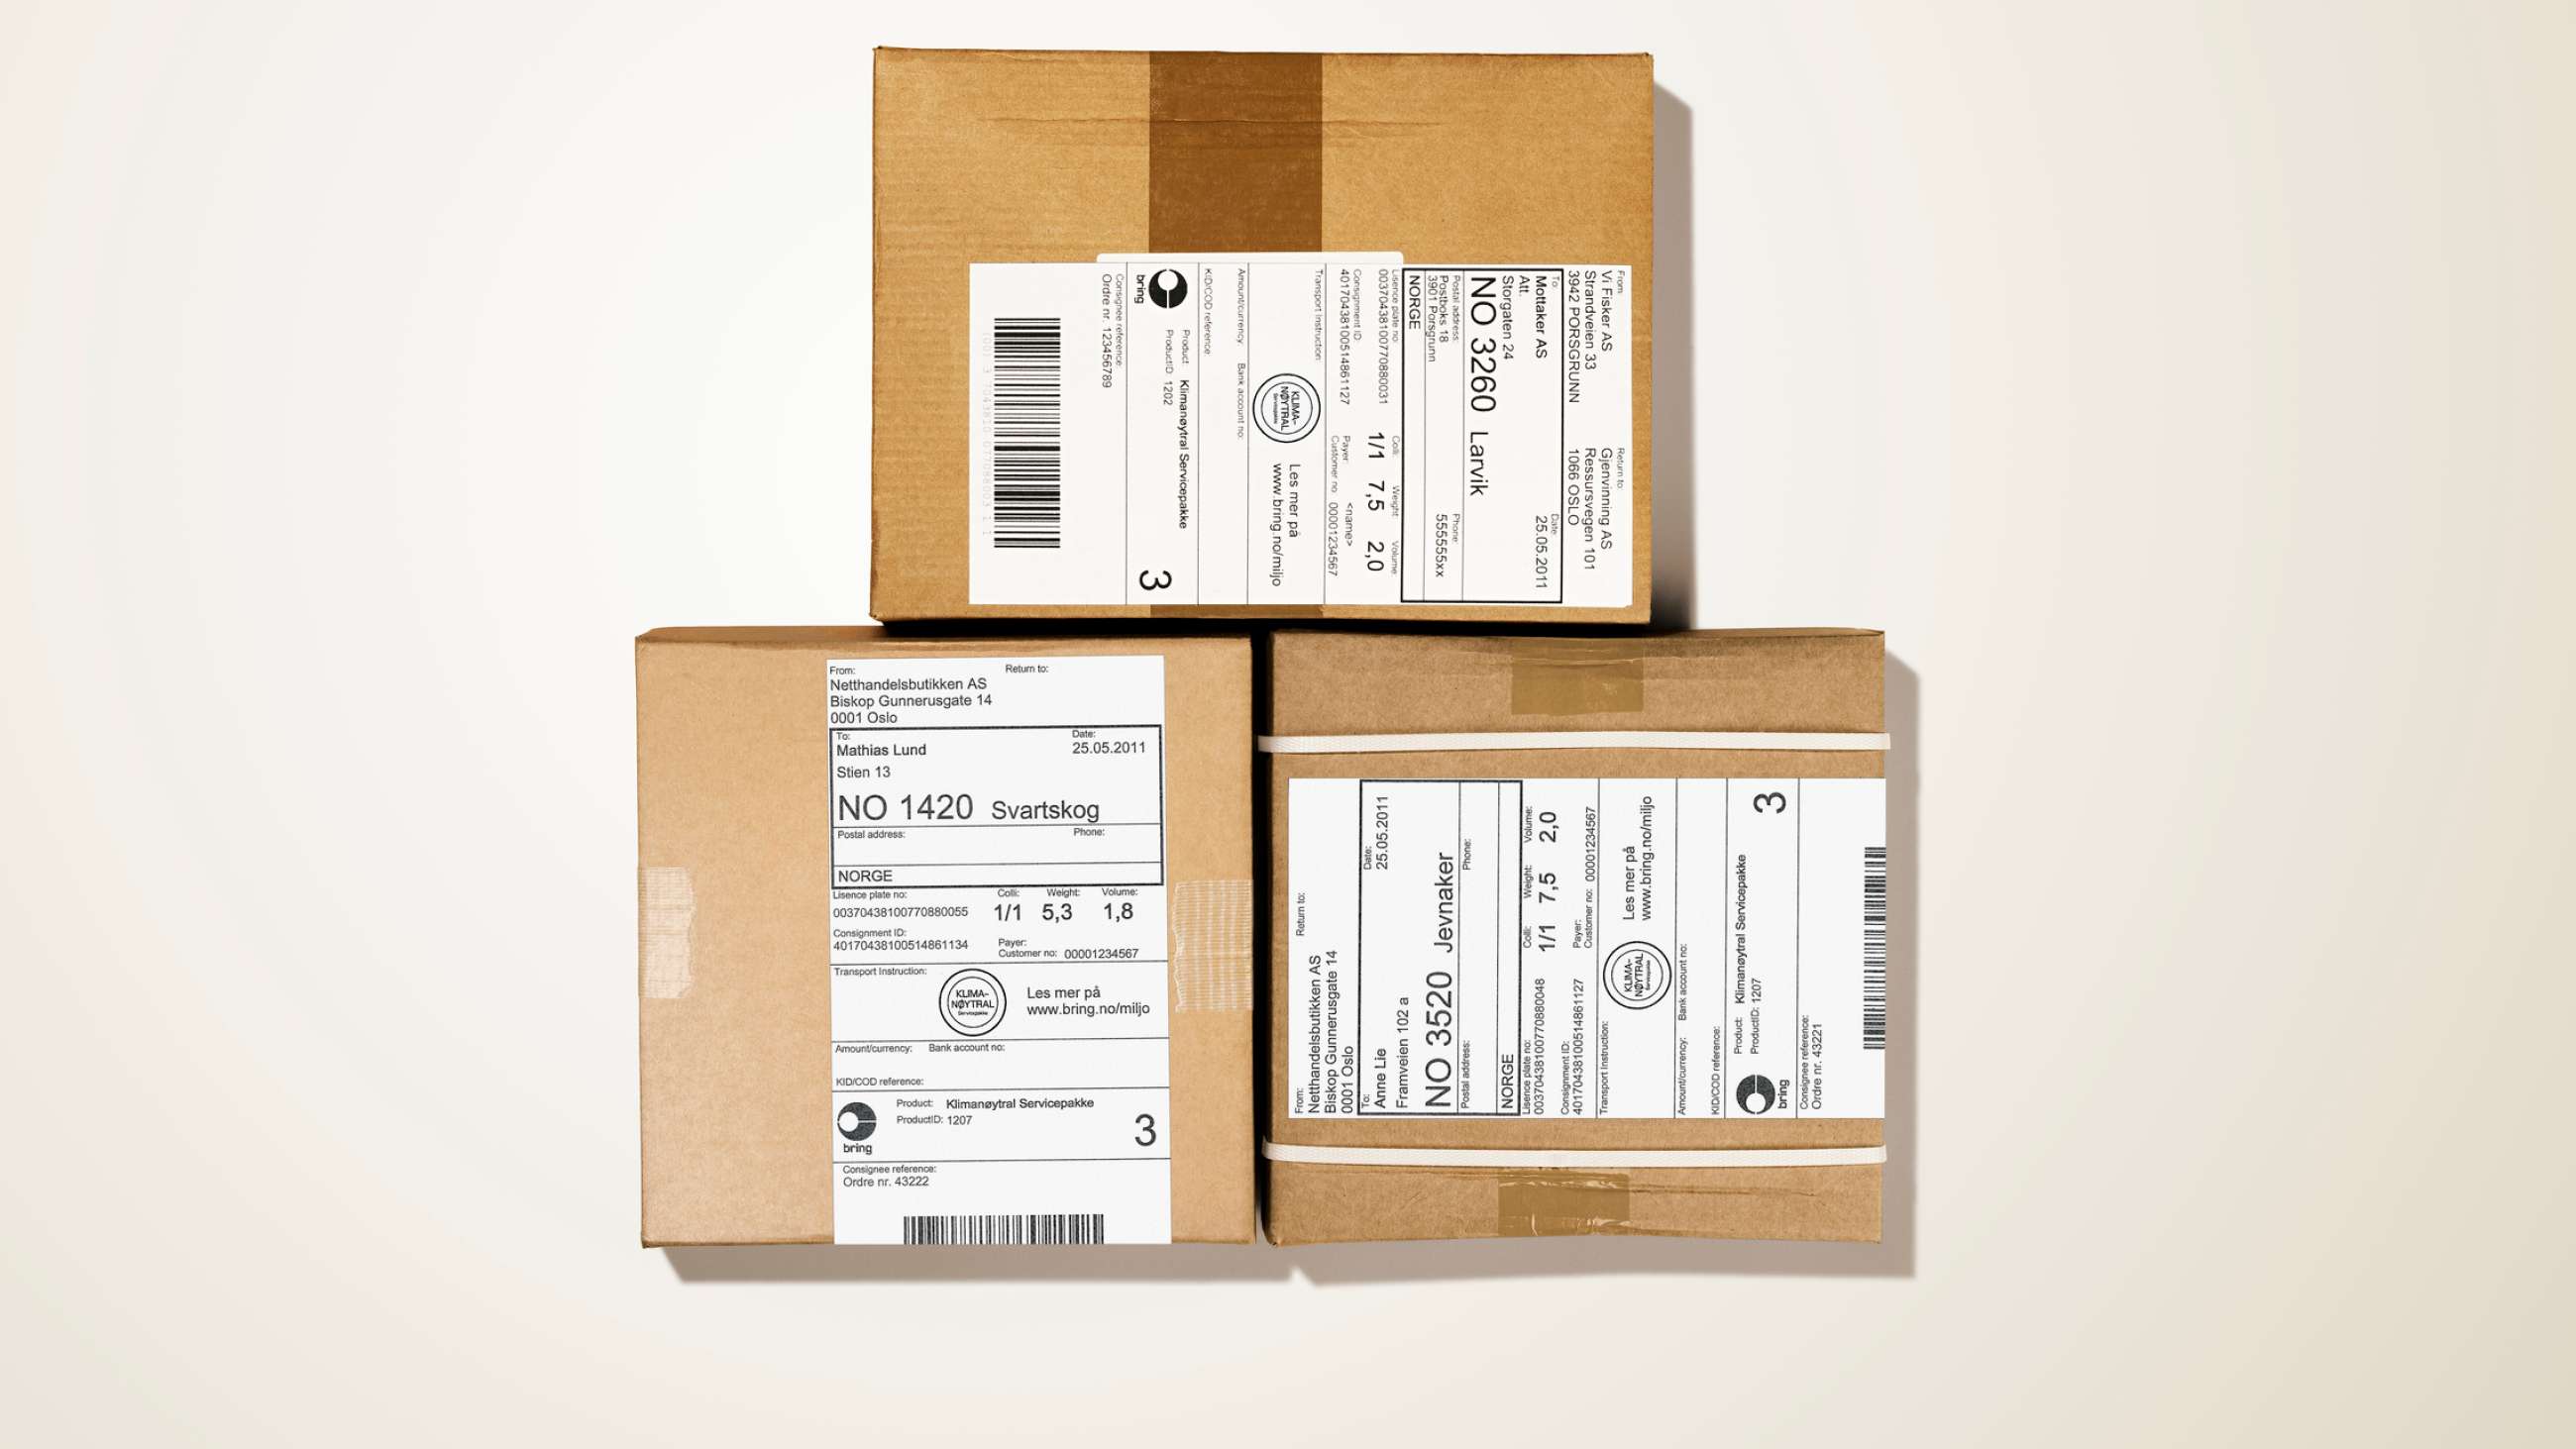 Three cardboard parcels with barcodes